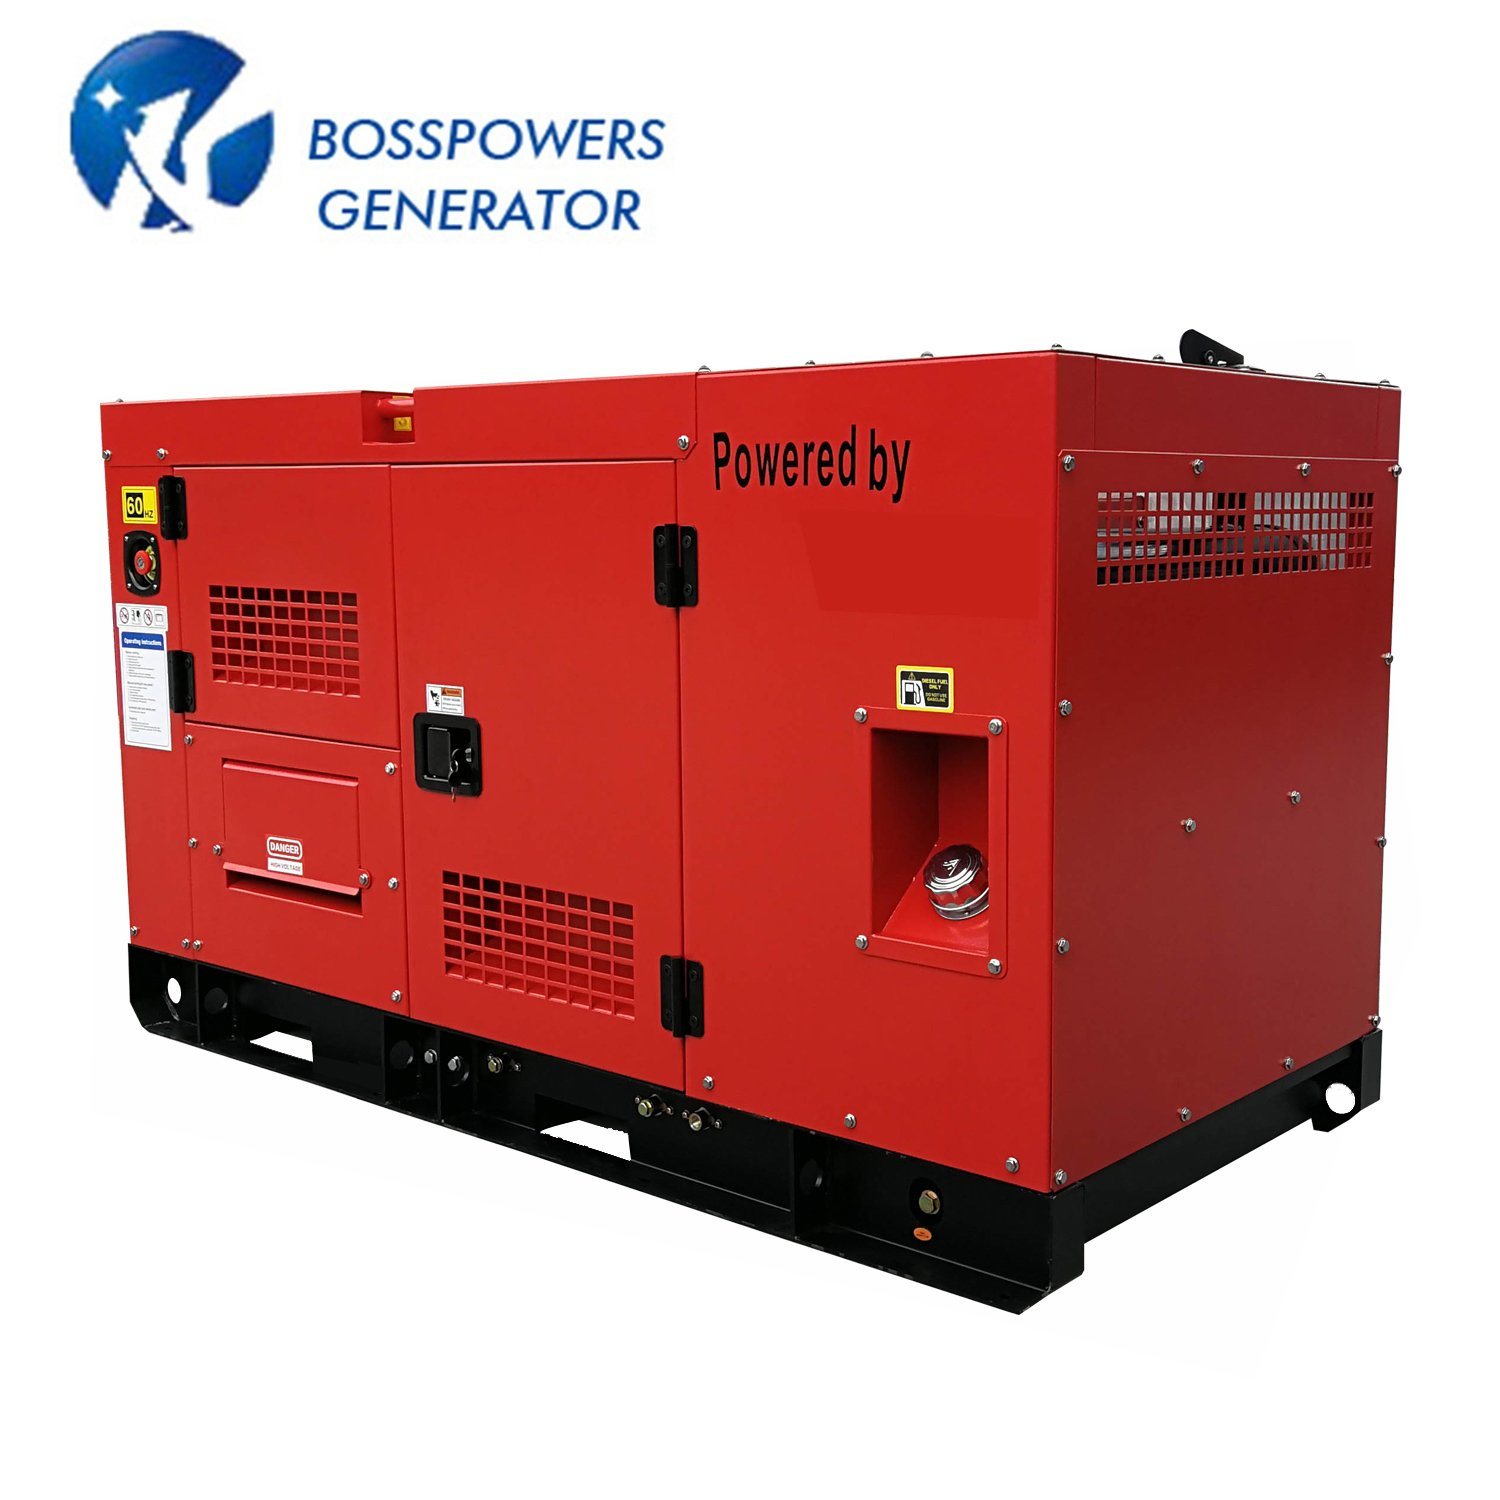 Electric Diesel Power Generator 6kw-1500kw with Silent Soundproof Type